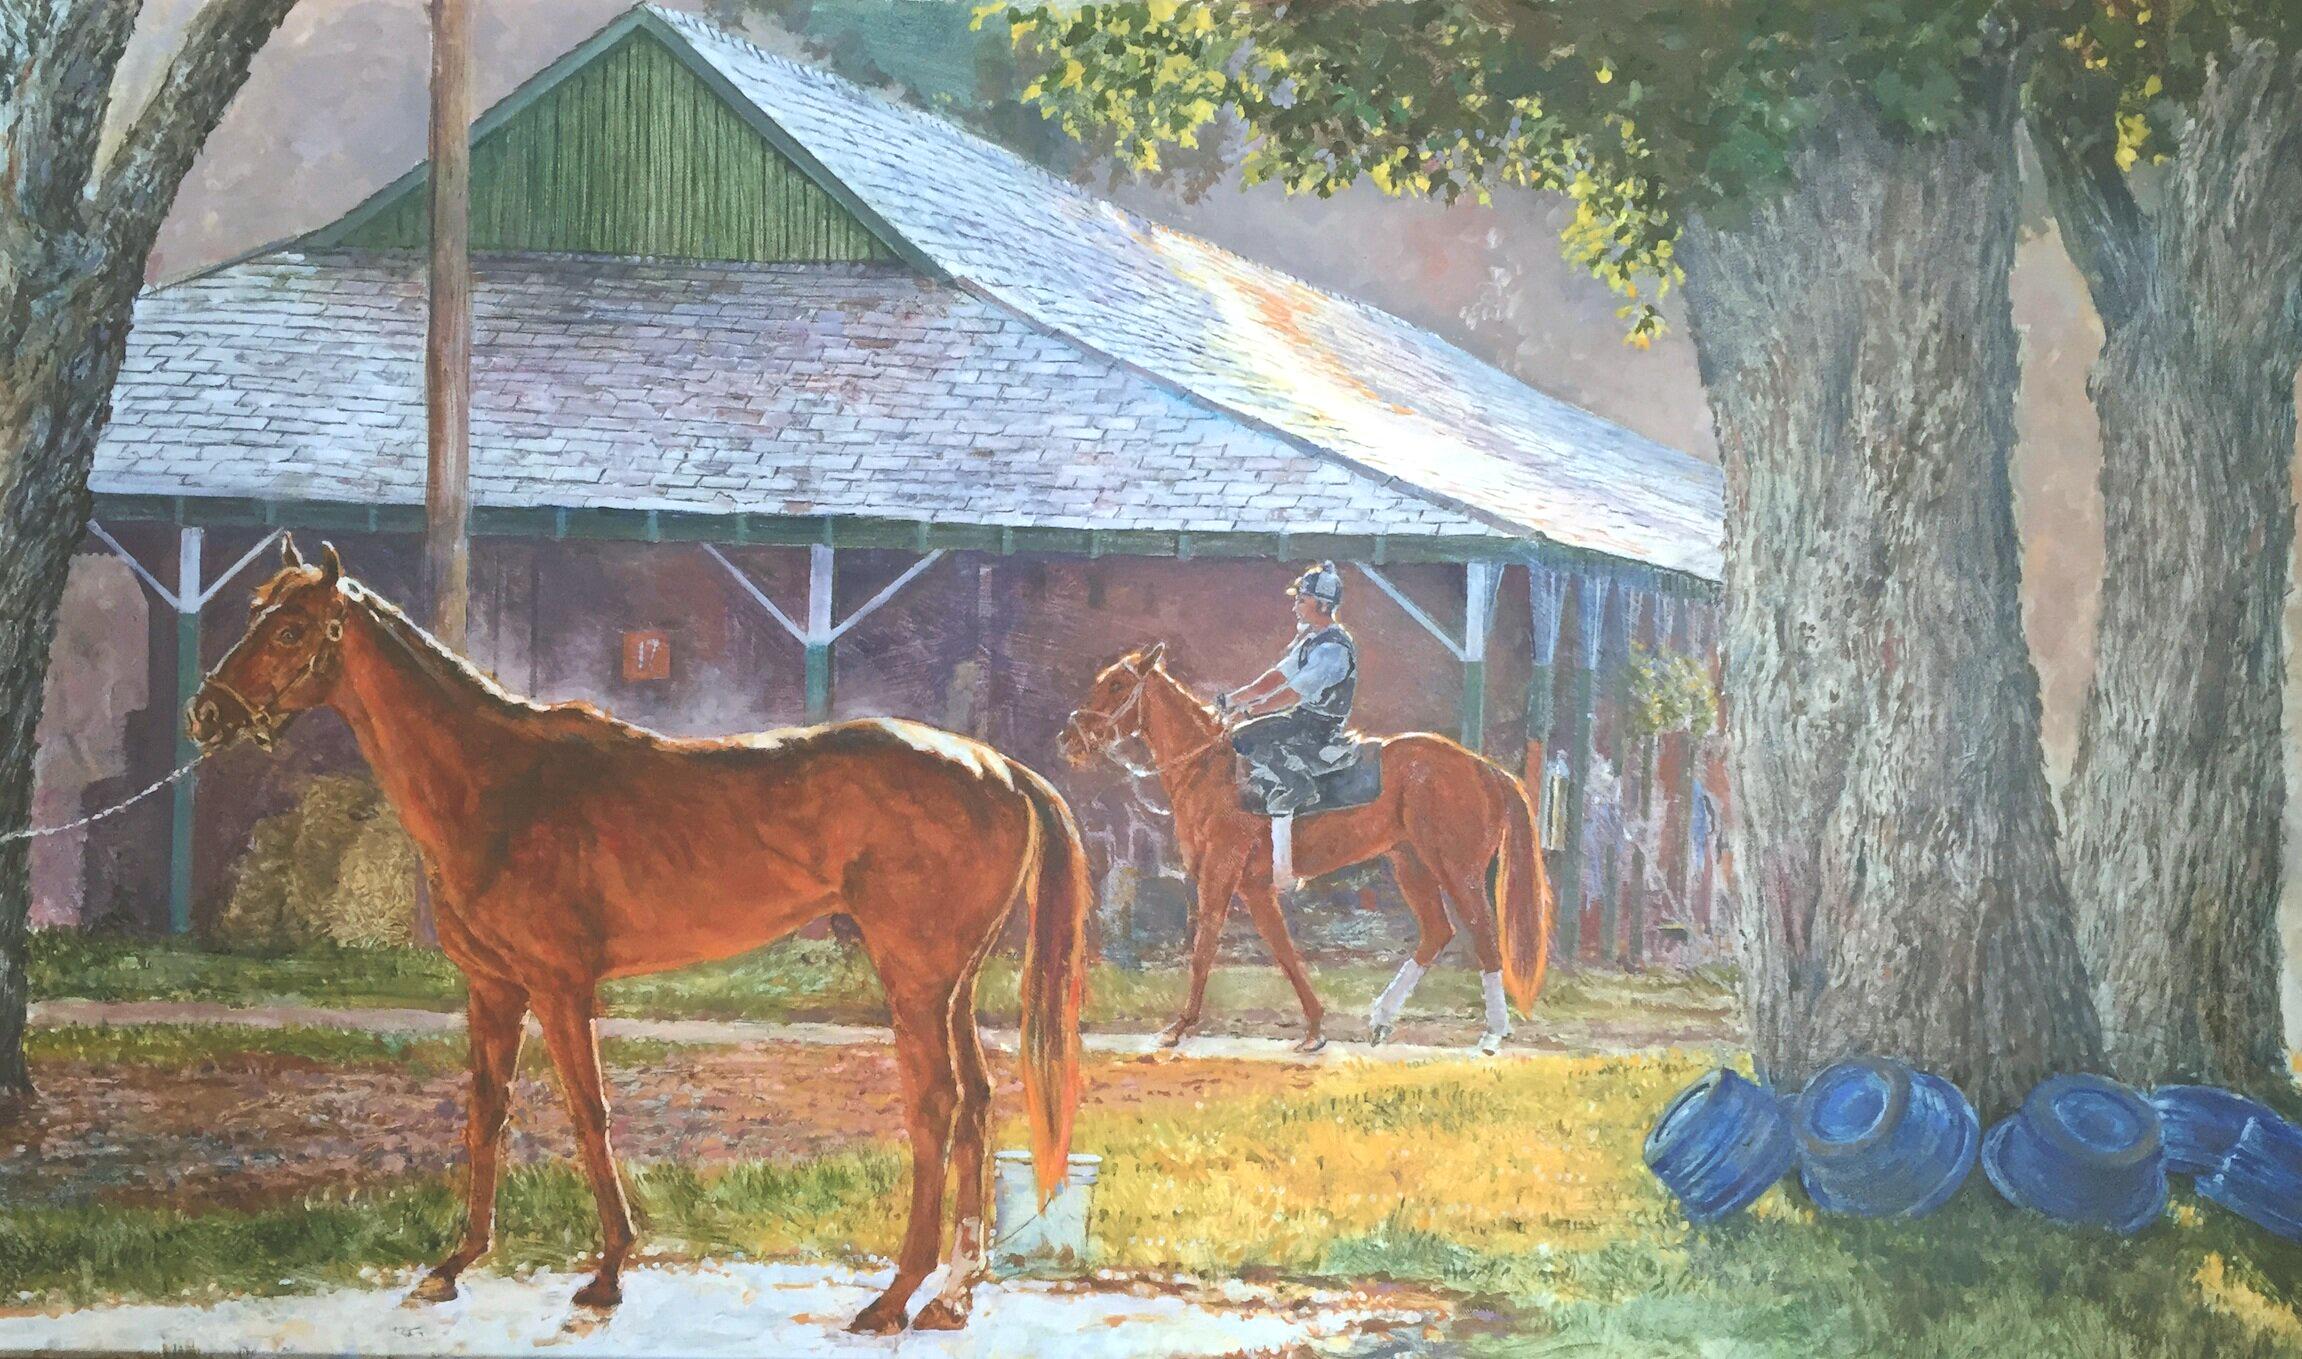 Dahl Taylor, "Stables with Blue Buckets", Equine Oil Painting, 24x40